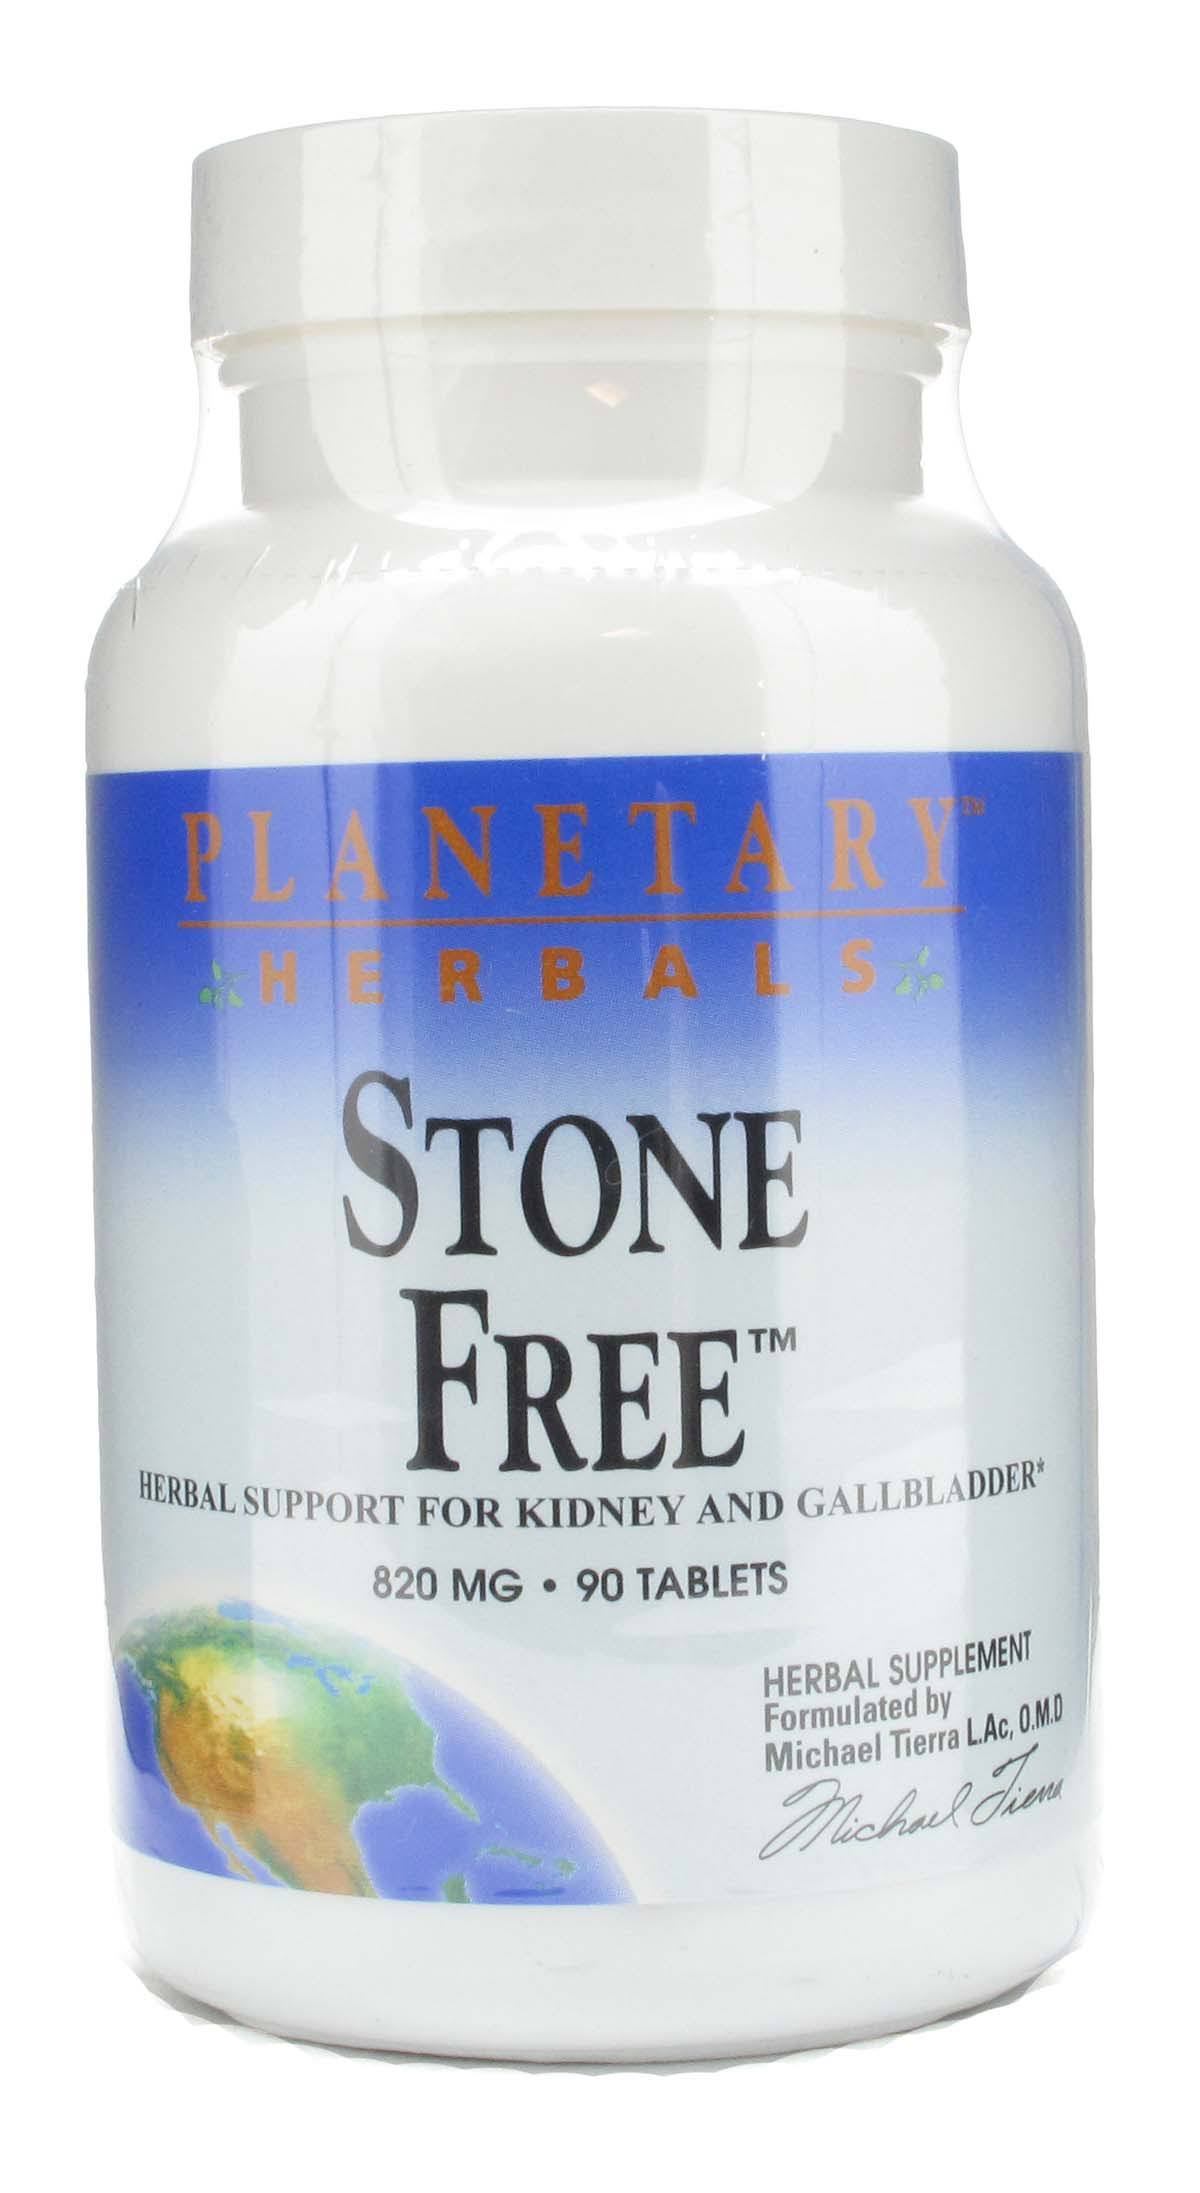 Planetary Herbals Stone Free For Kidney & Gallstone - 90 Tablets, 820mg